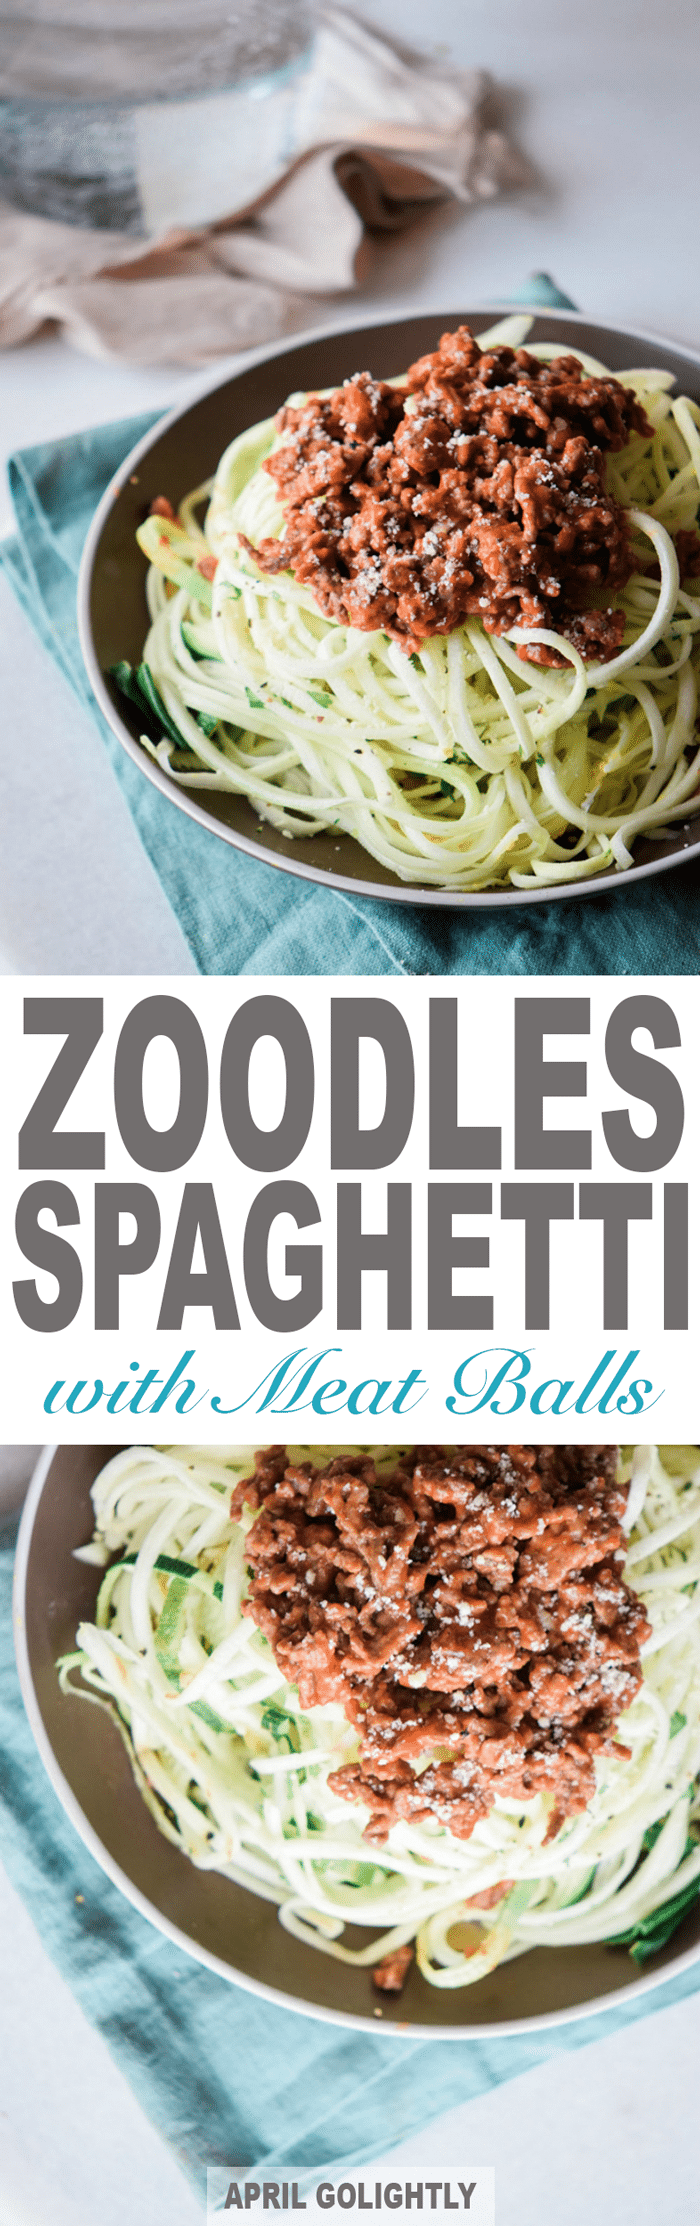 Zoodles Spaggetti with Meat Balls Recipe 